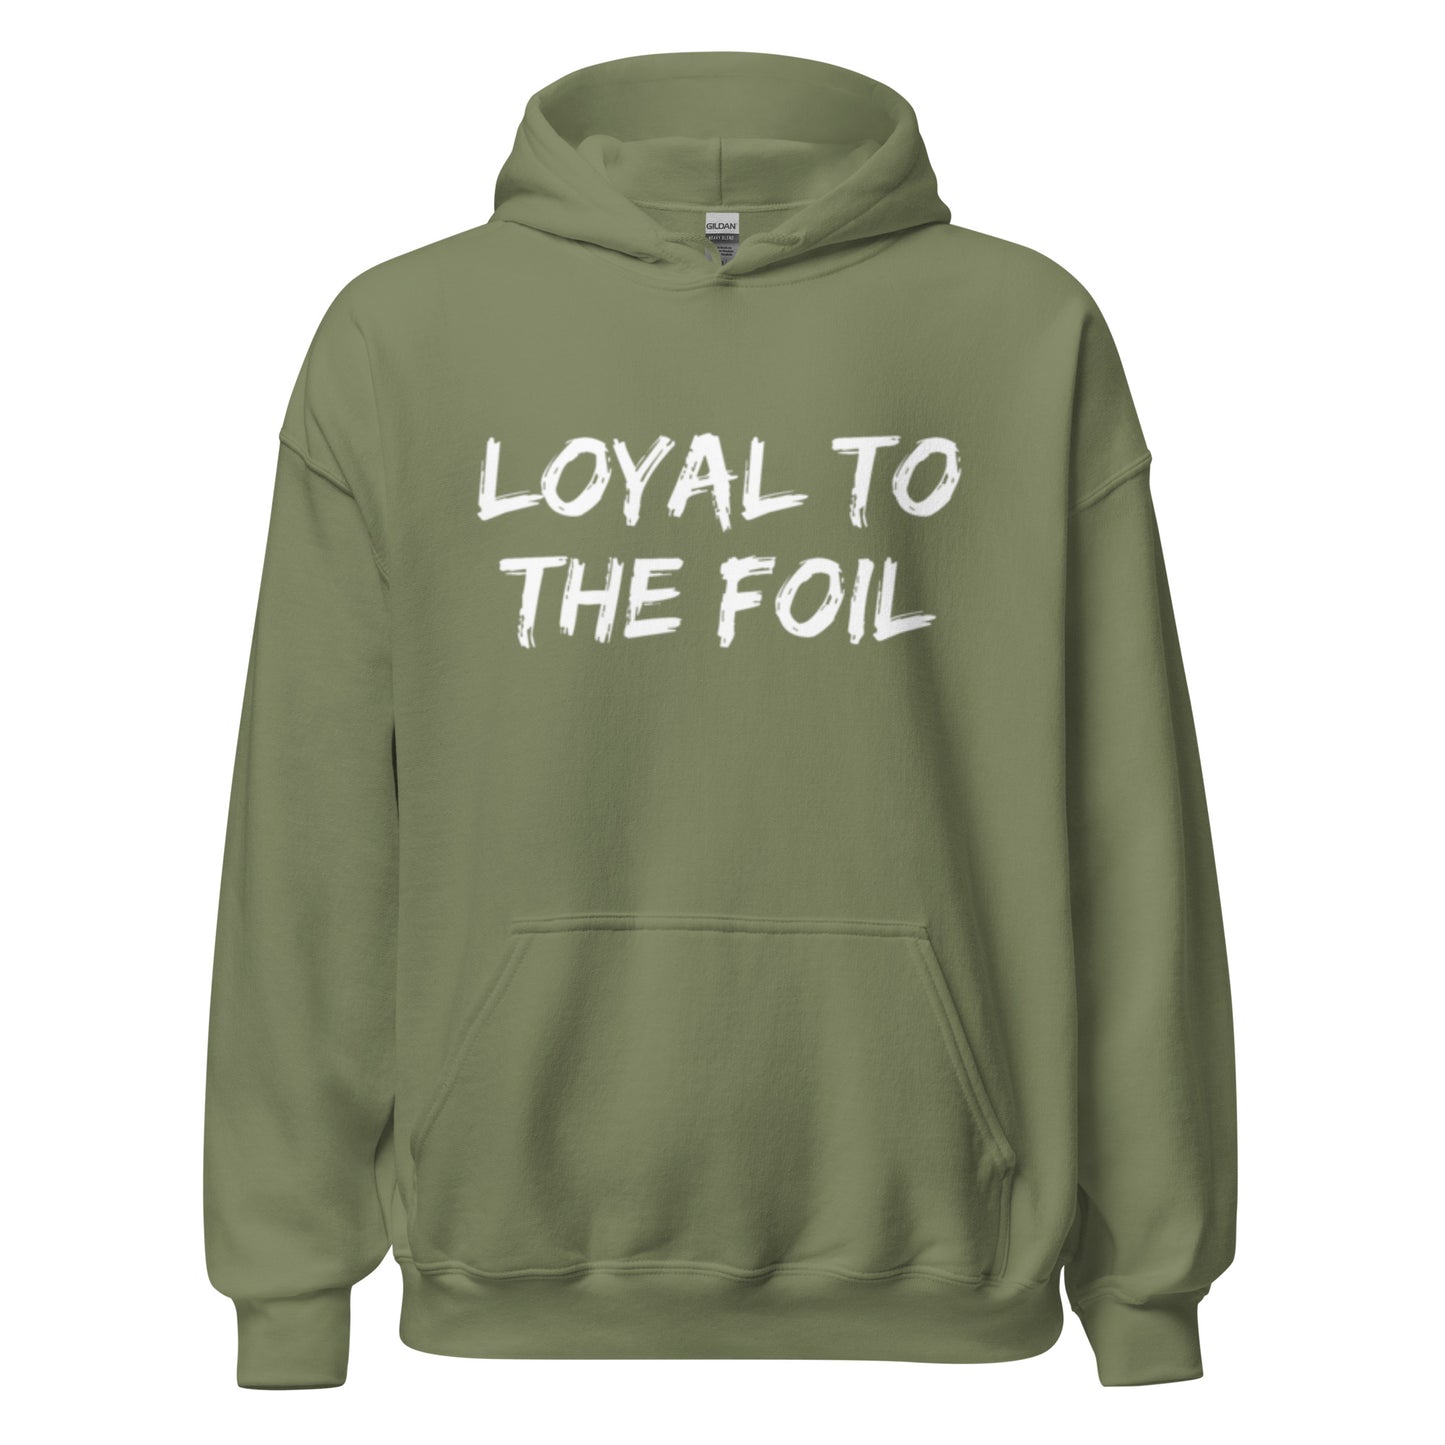 Loyal To The Foil Hoodies